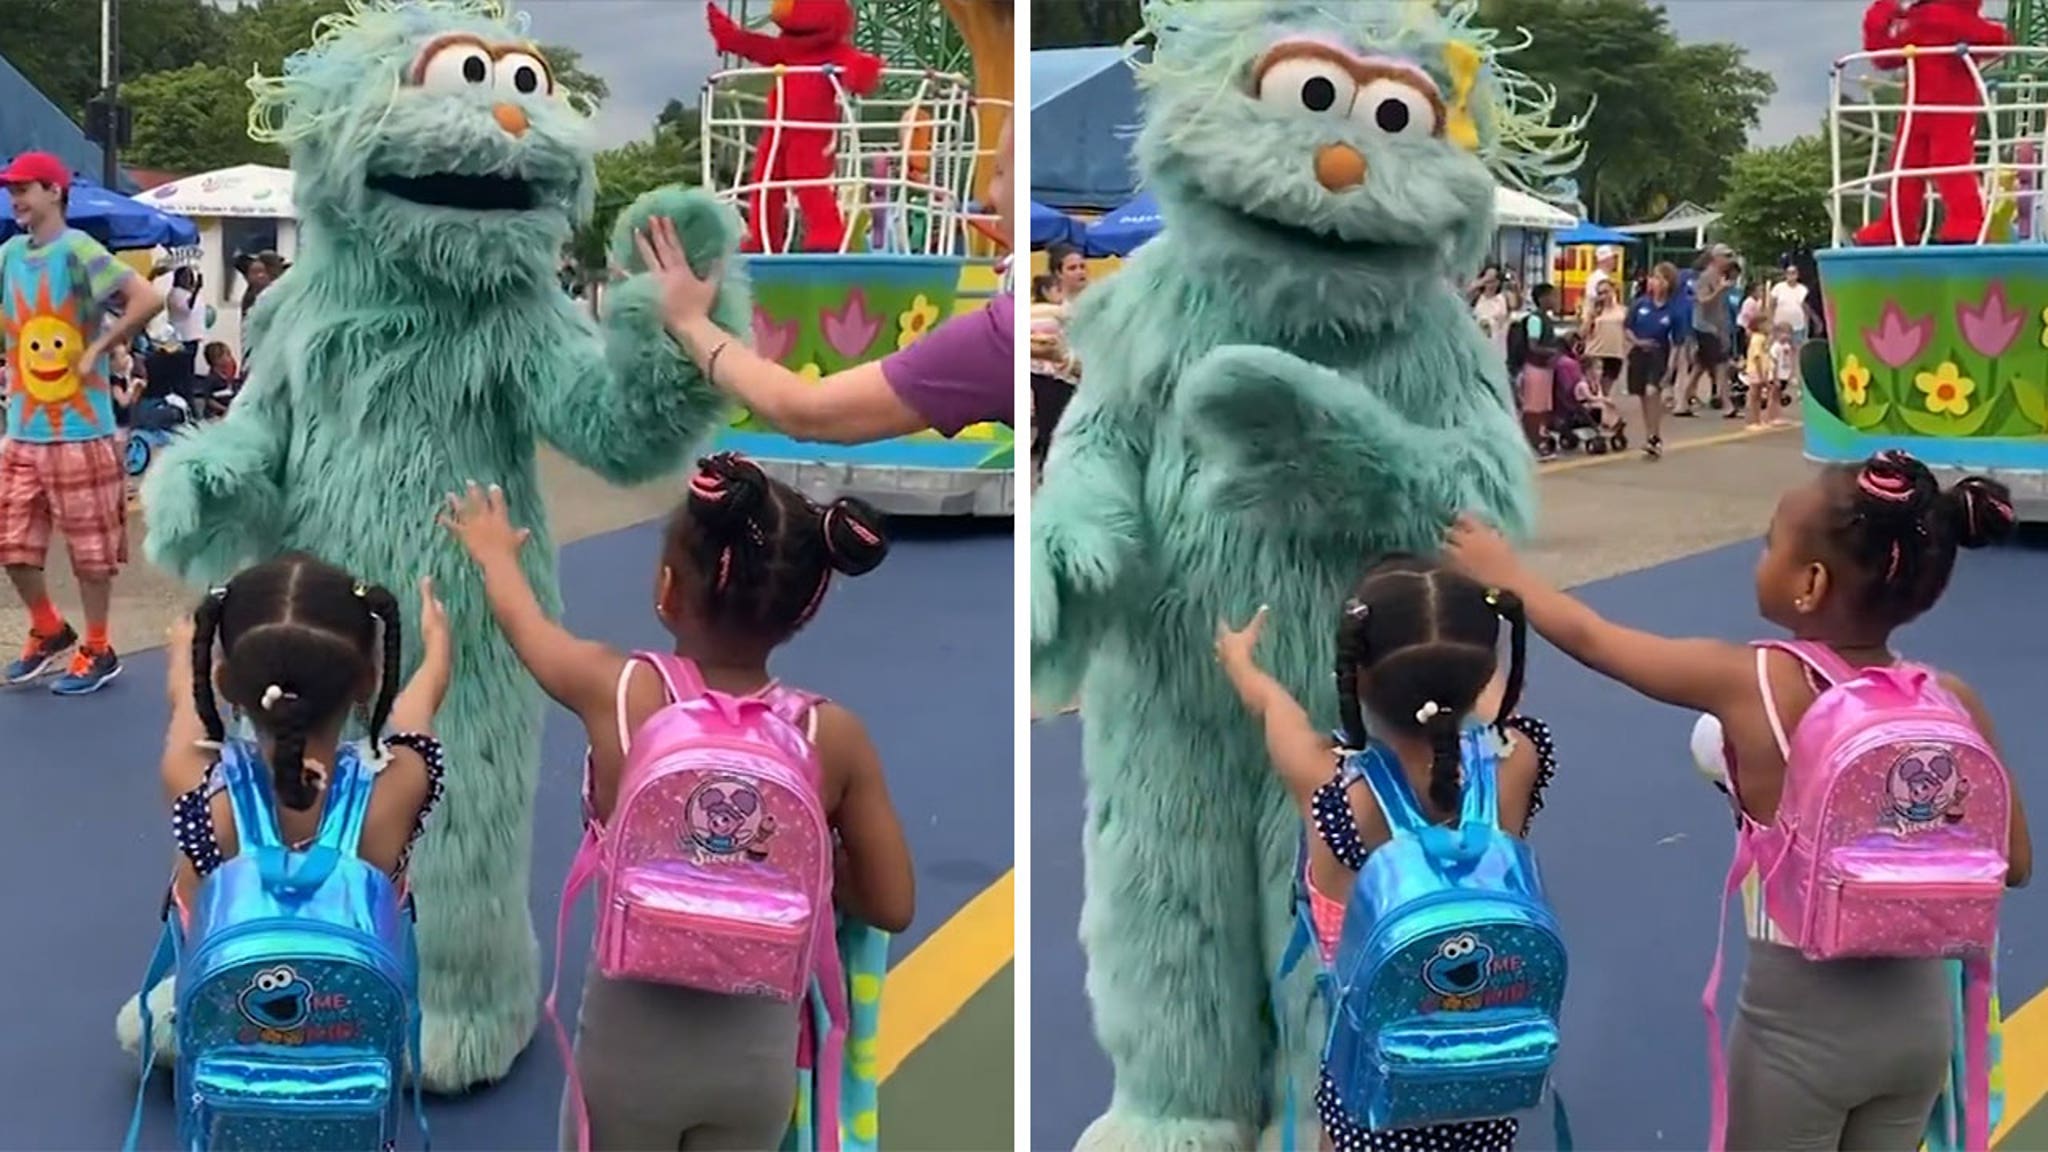 Sesame Place Invites Black Family Back To Park, But Children Too Traumatized